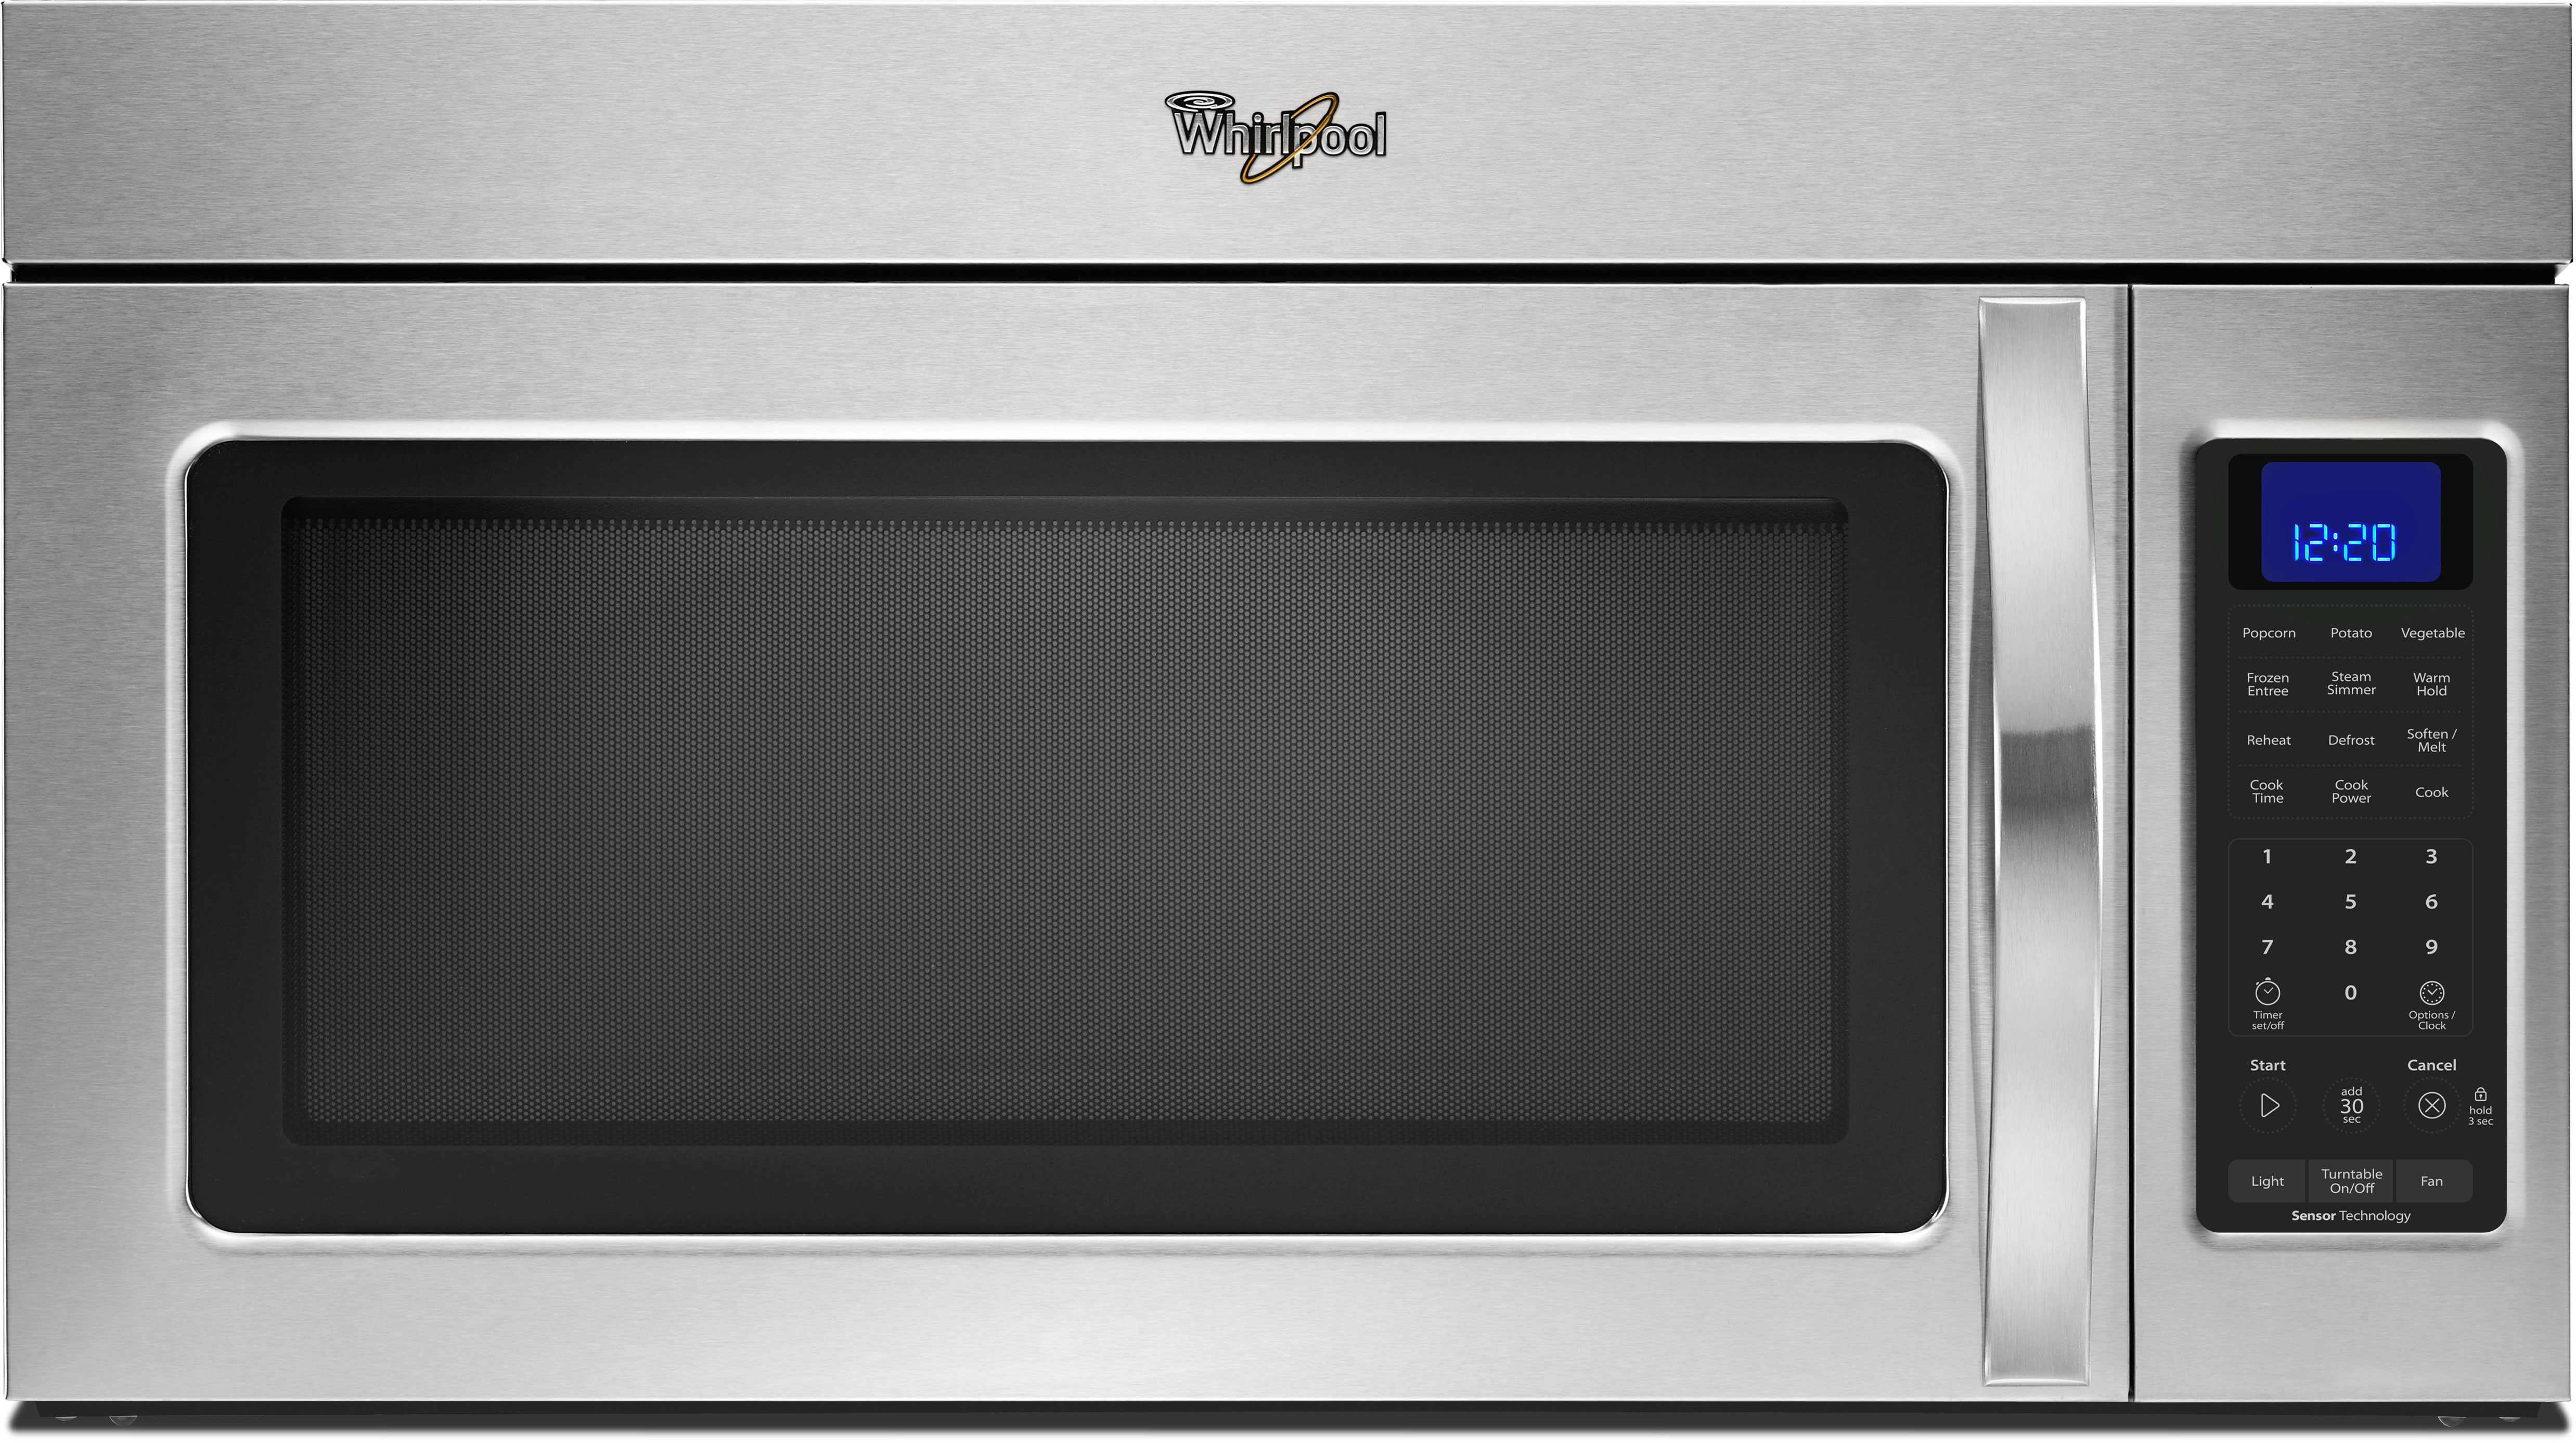 Whirlpool WMH32519C 1.9 cu. ft. Over-the-Range Microwave Oven with